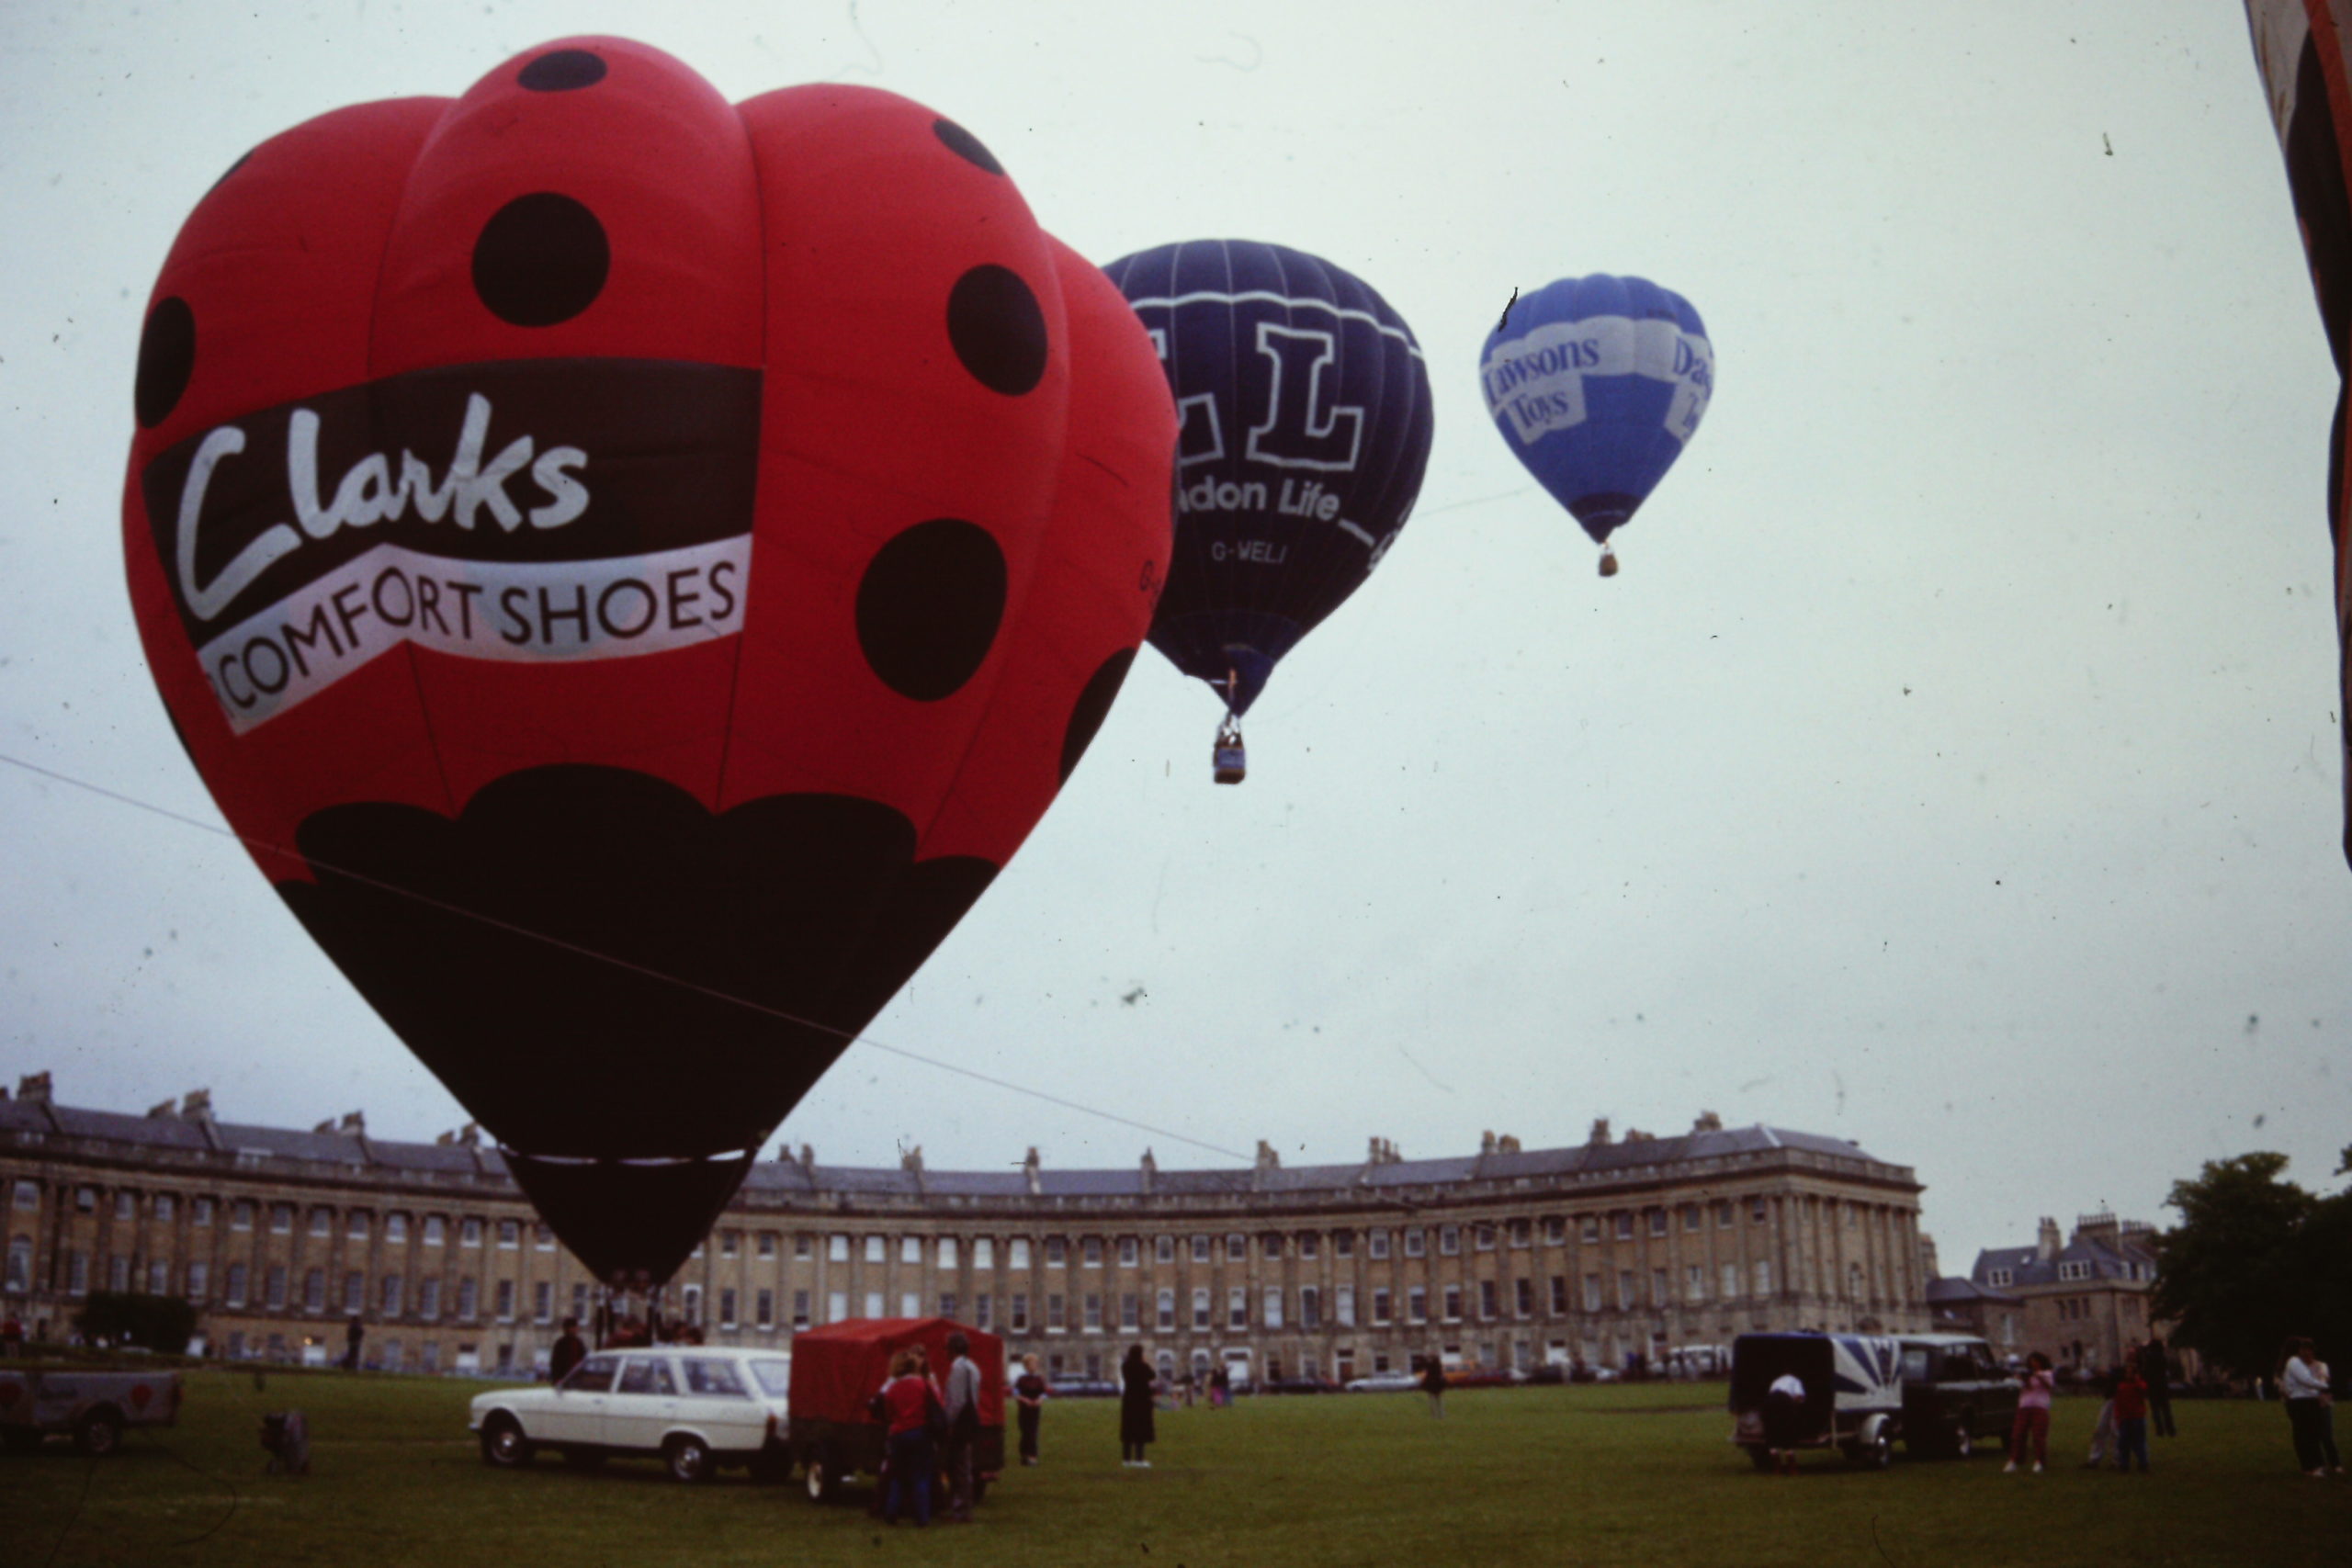 Three hot air balloons taking off outside the Royal Crescent